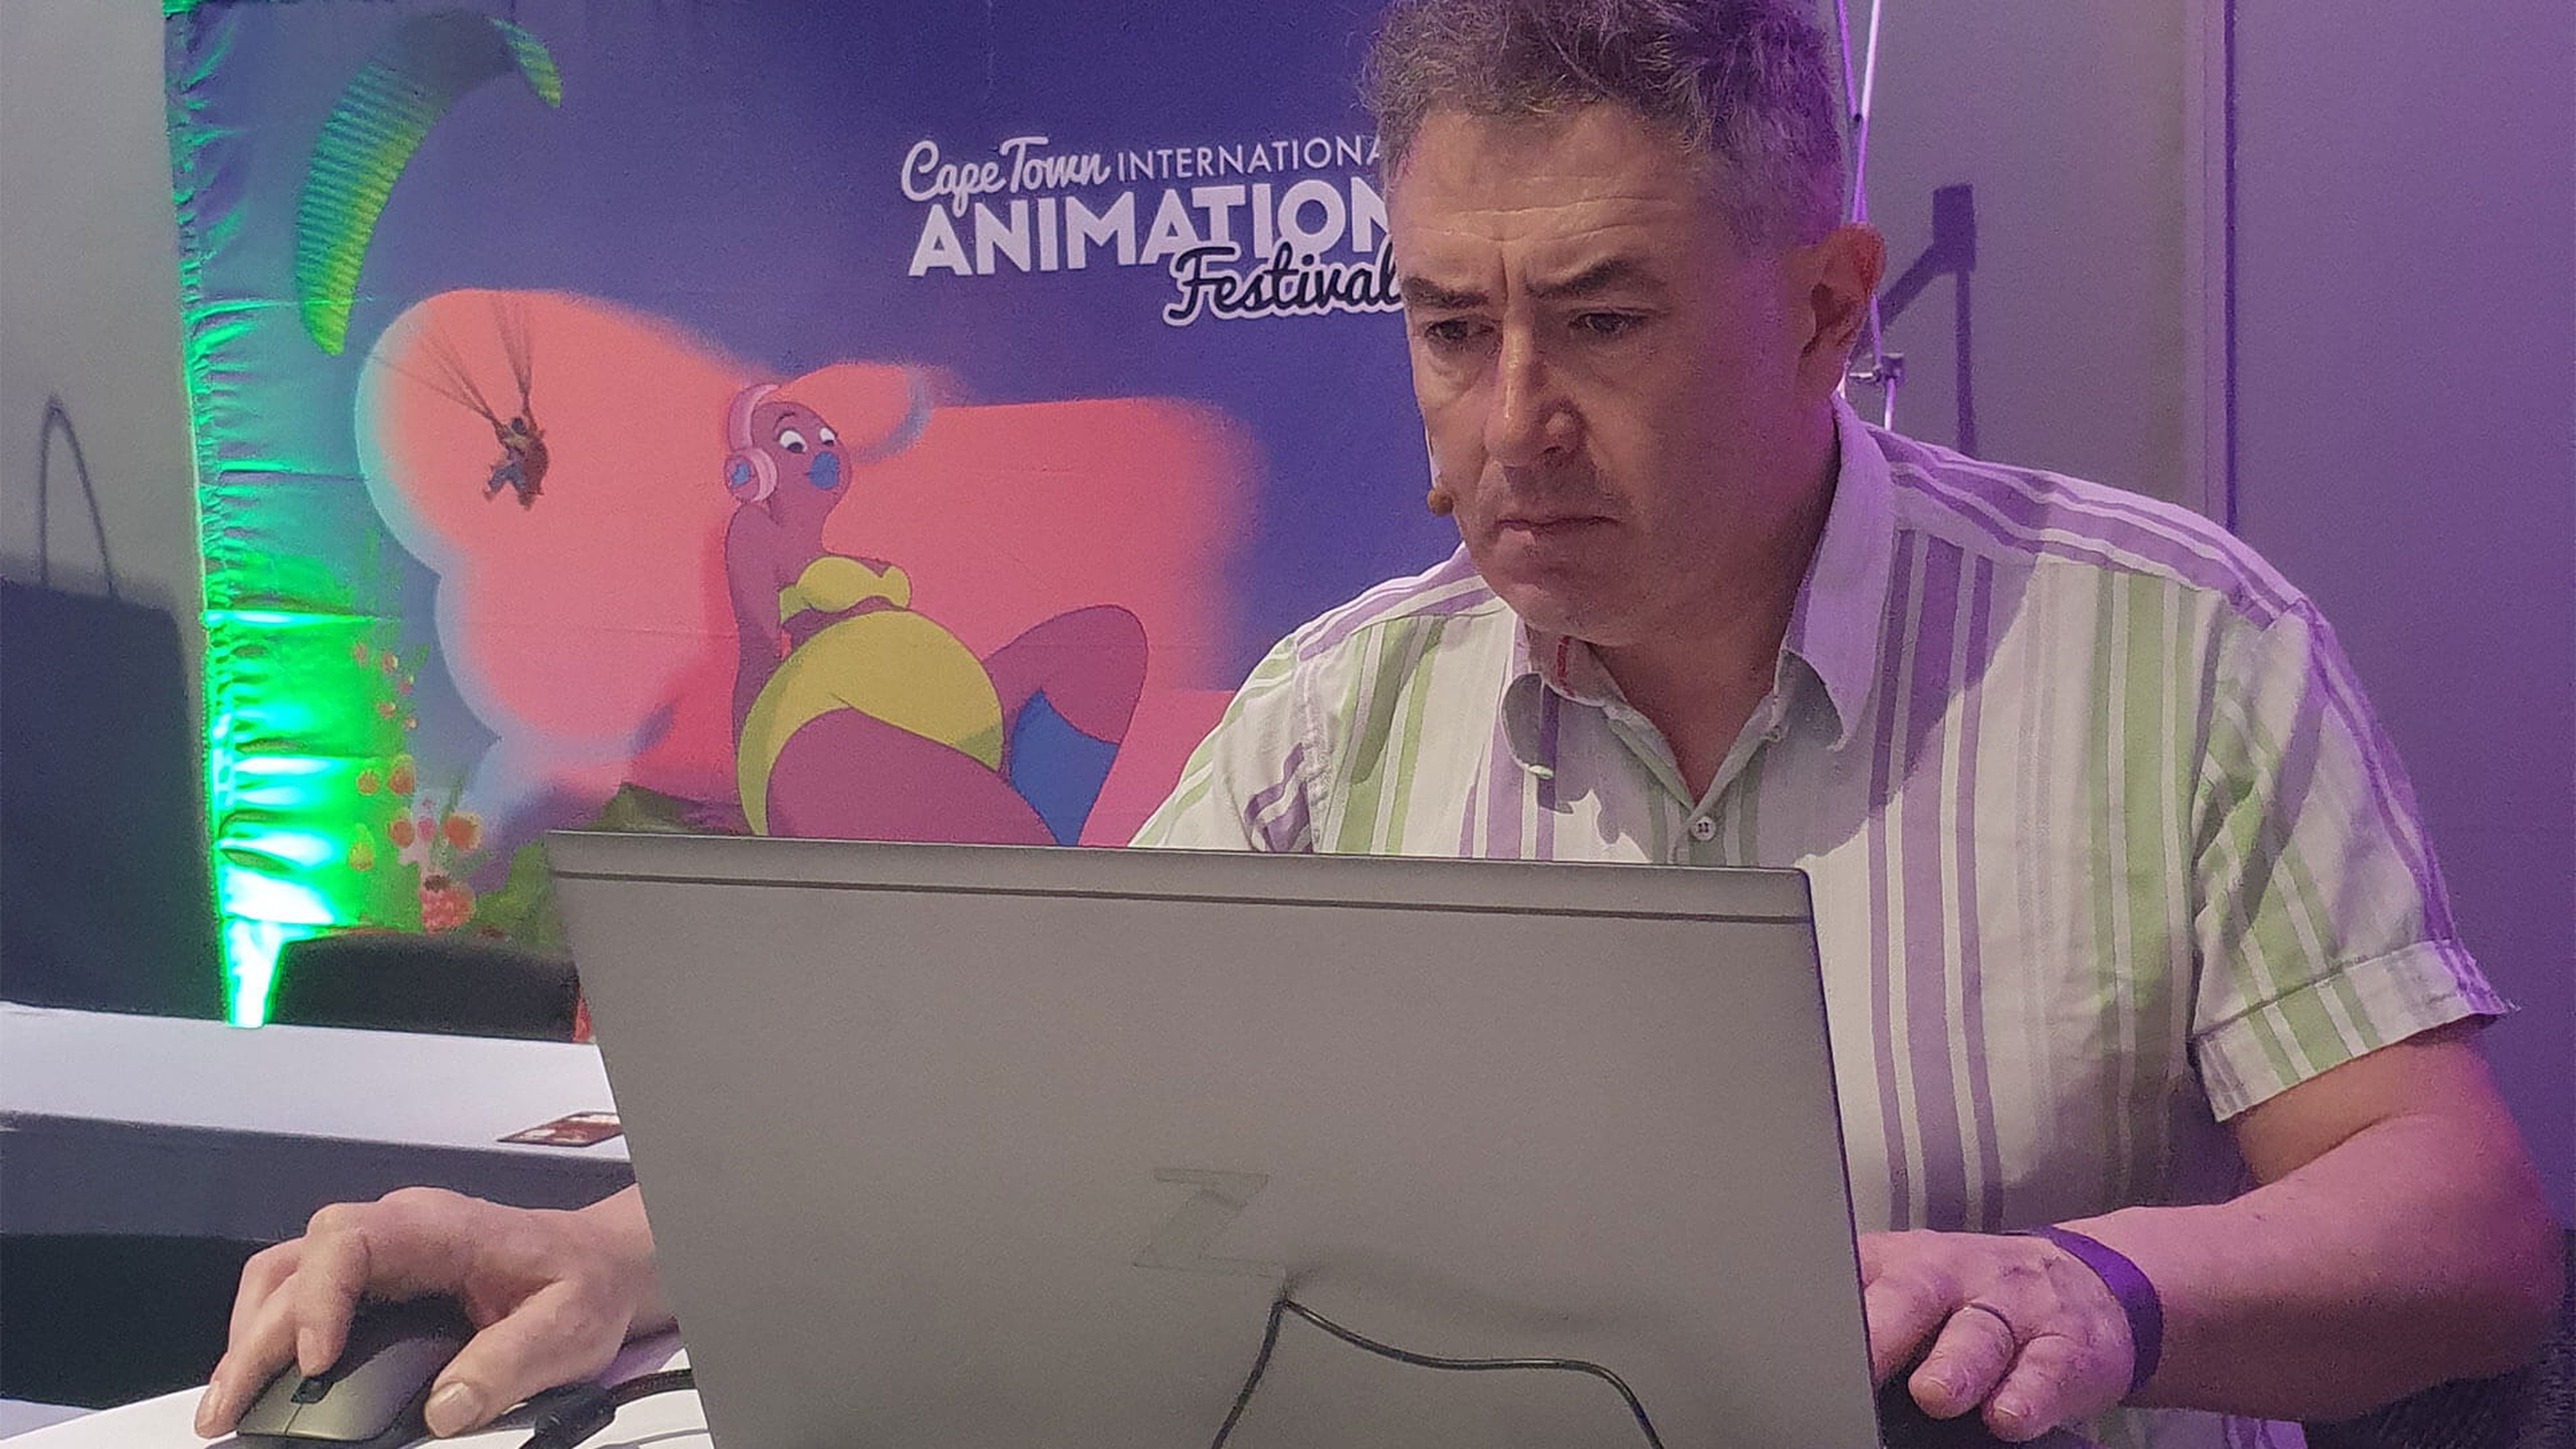 Houdini Tutor Simon Browne sat at a laptop with a Cape Town International Animation Festival banner in the background